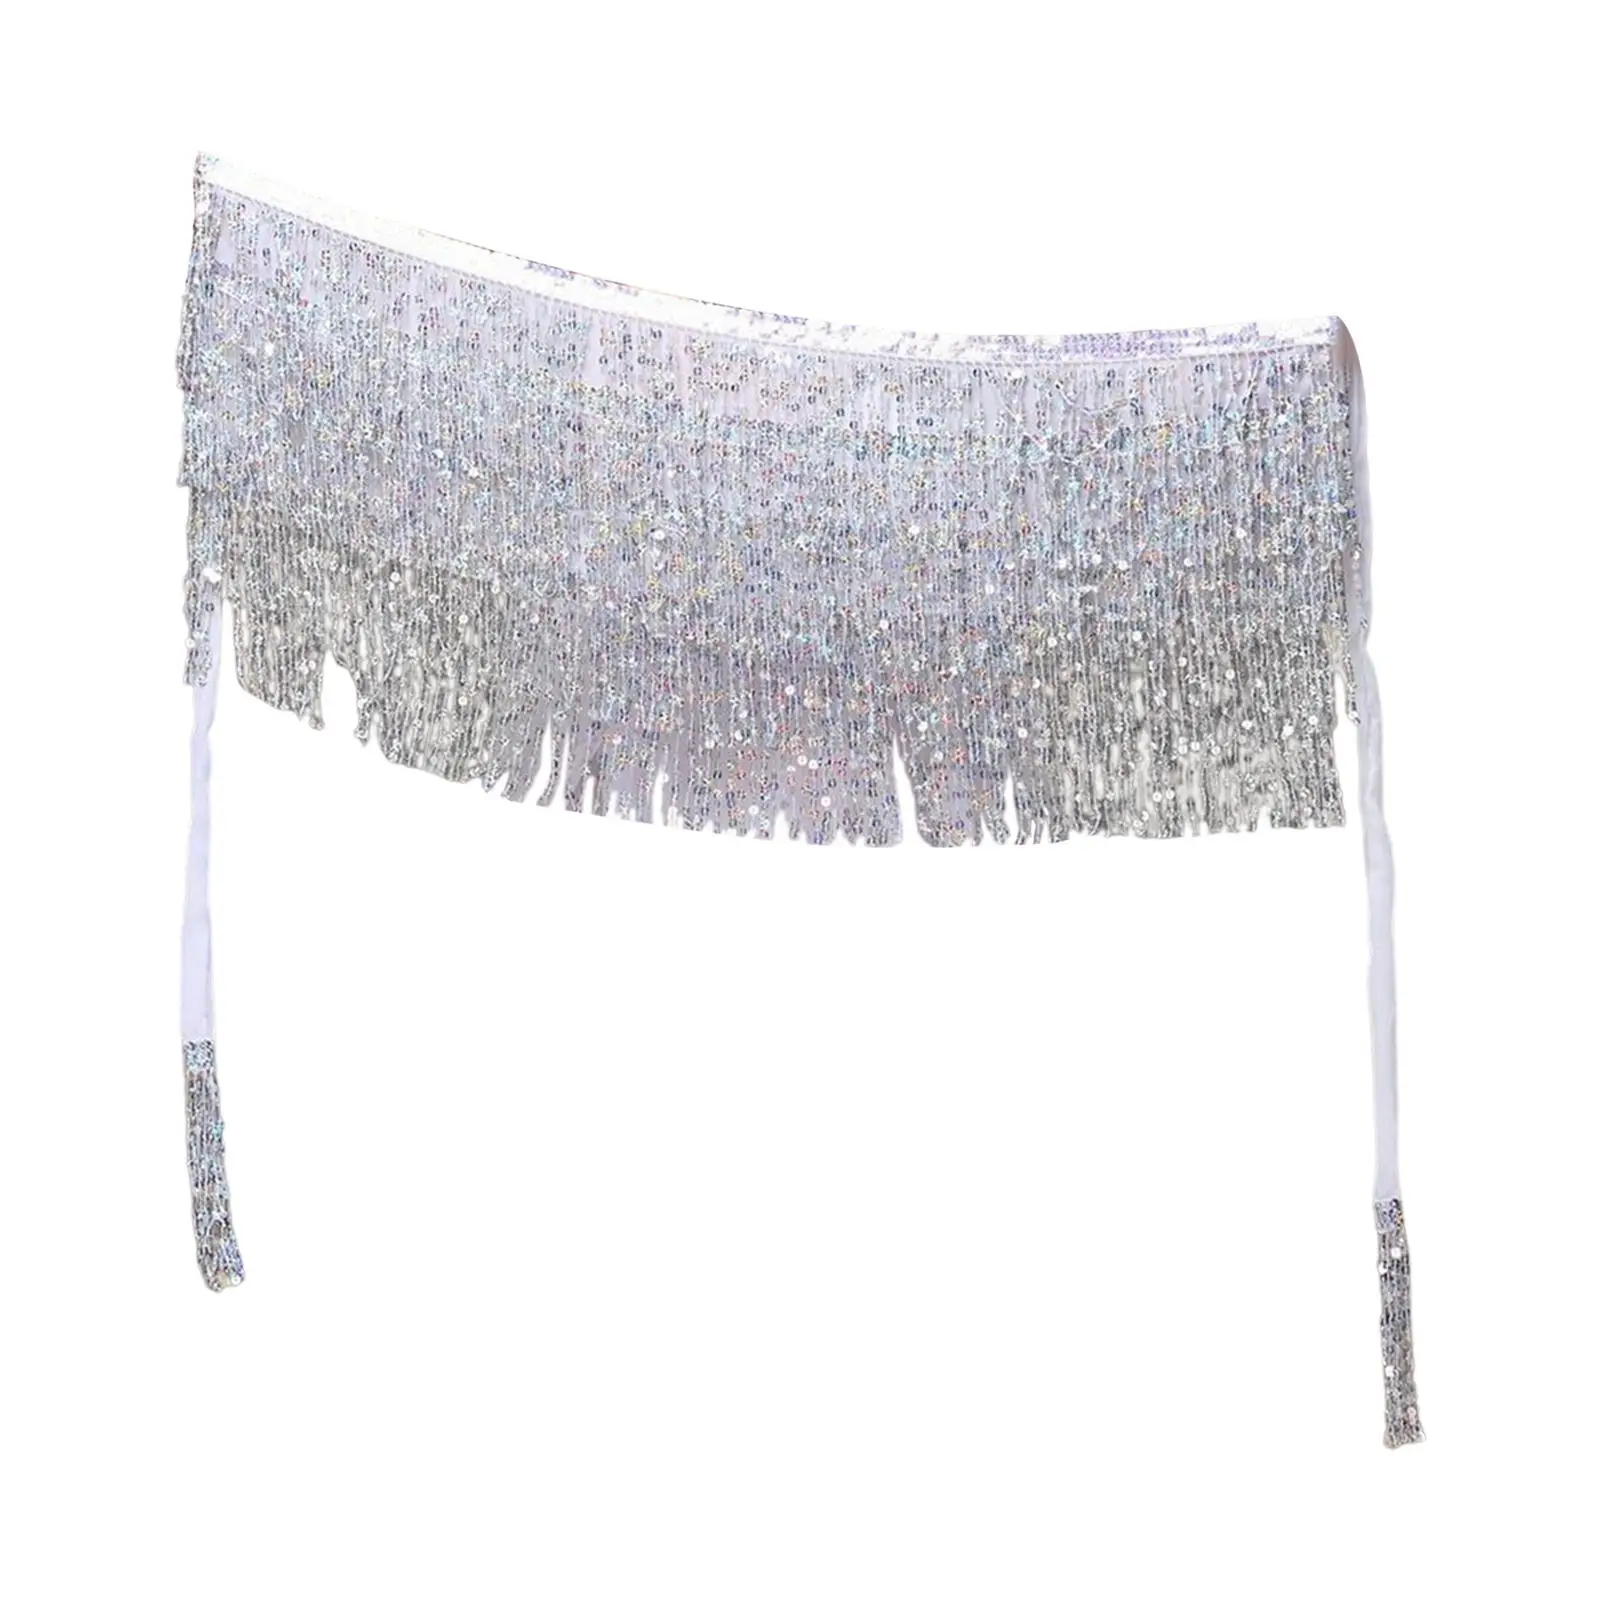 Bohemian Belly Dance Skirt Sequined Tassel Sequin Body Accessories Hip Scarf Waist Chain Wrap for Show Performance Rave Women